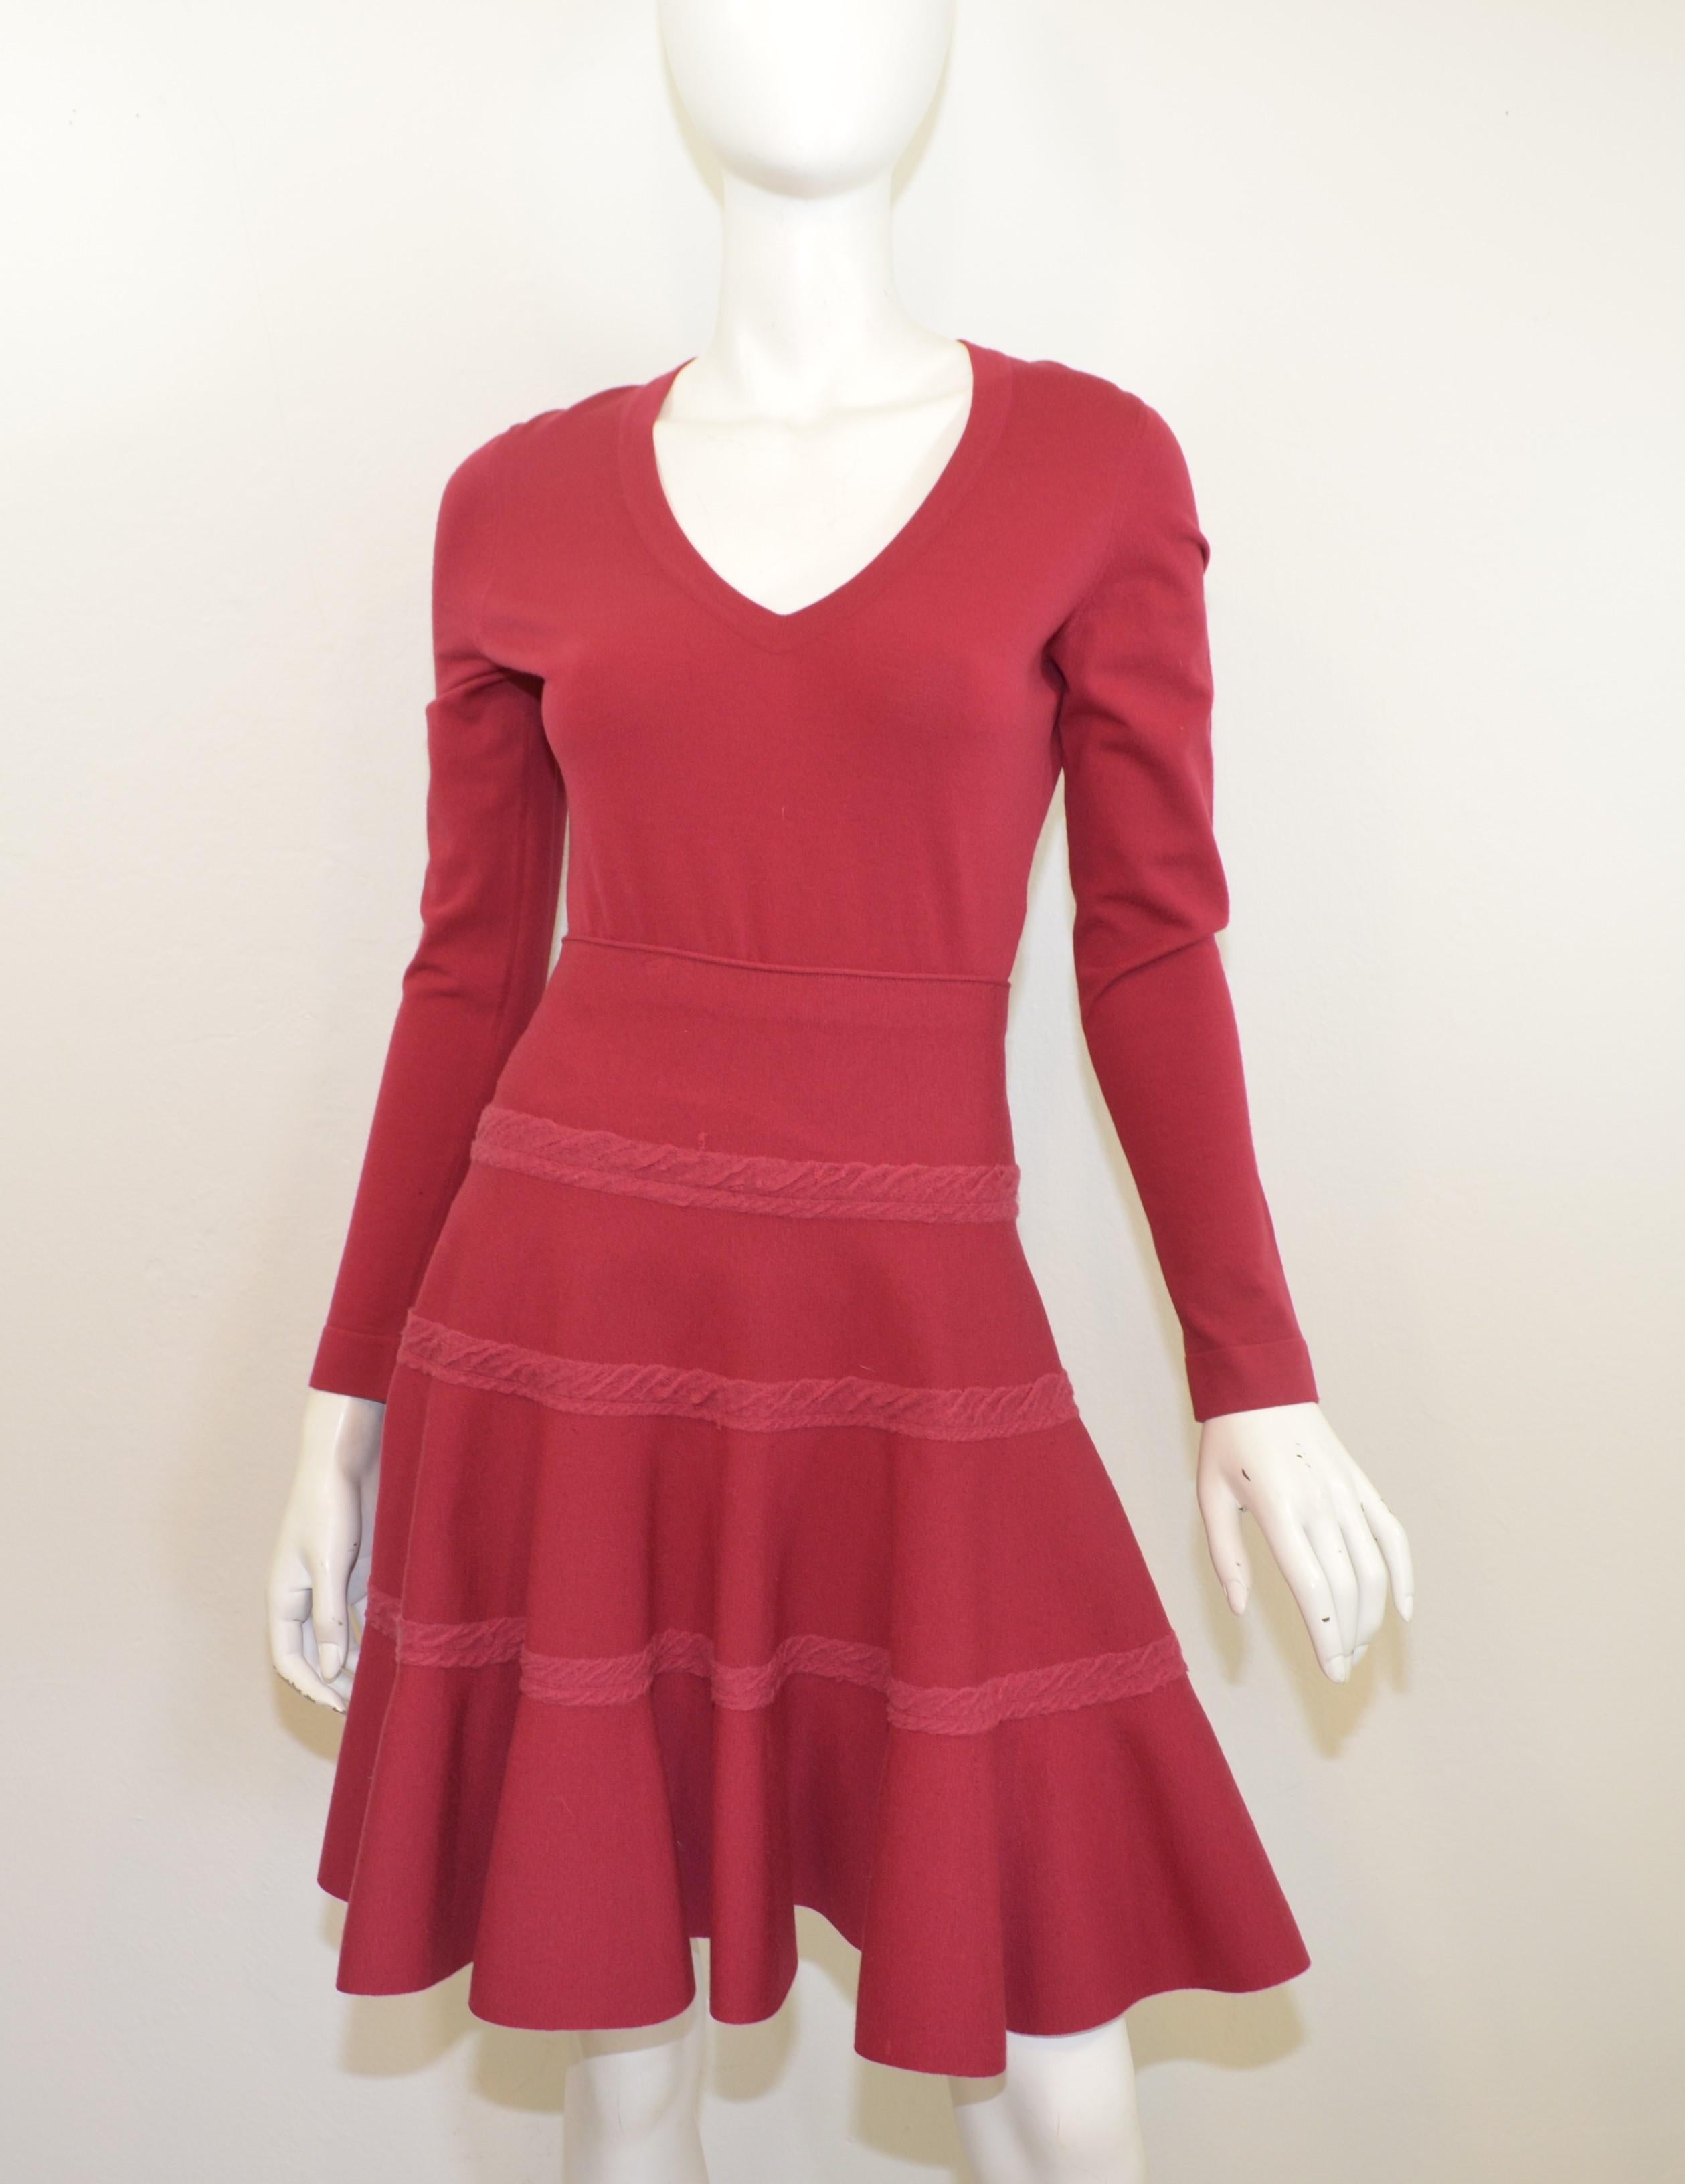 Alaia skirt set is featured in a raspberry, maroon colored knit. Top has a v-neckline and skirt has a flared silhouette (fit & flare style). Set is labeled size 42, and composed with a wool, polyester, and nylon blend. Made in